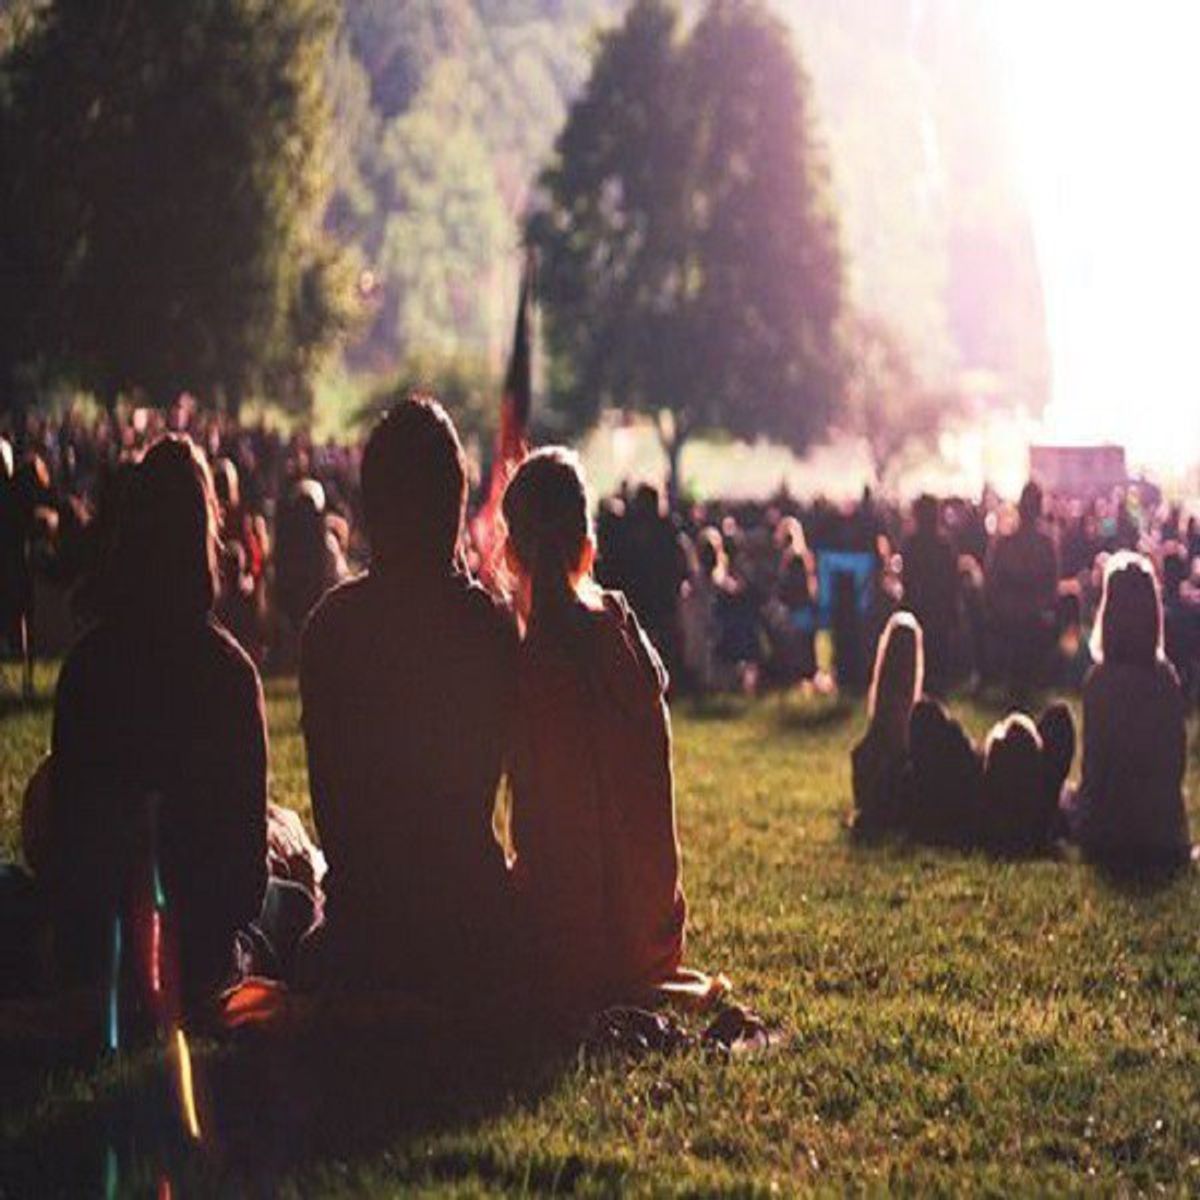 10 Things I Love About Lawn Seating At Concerts